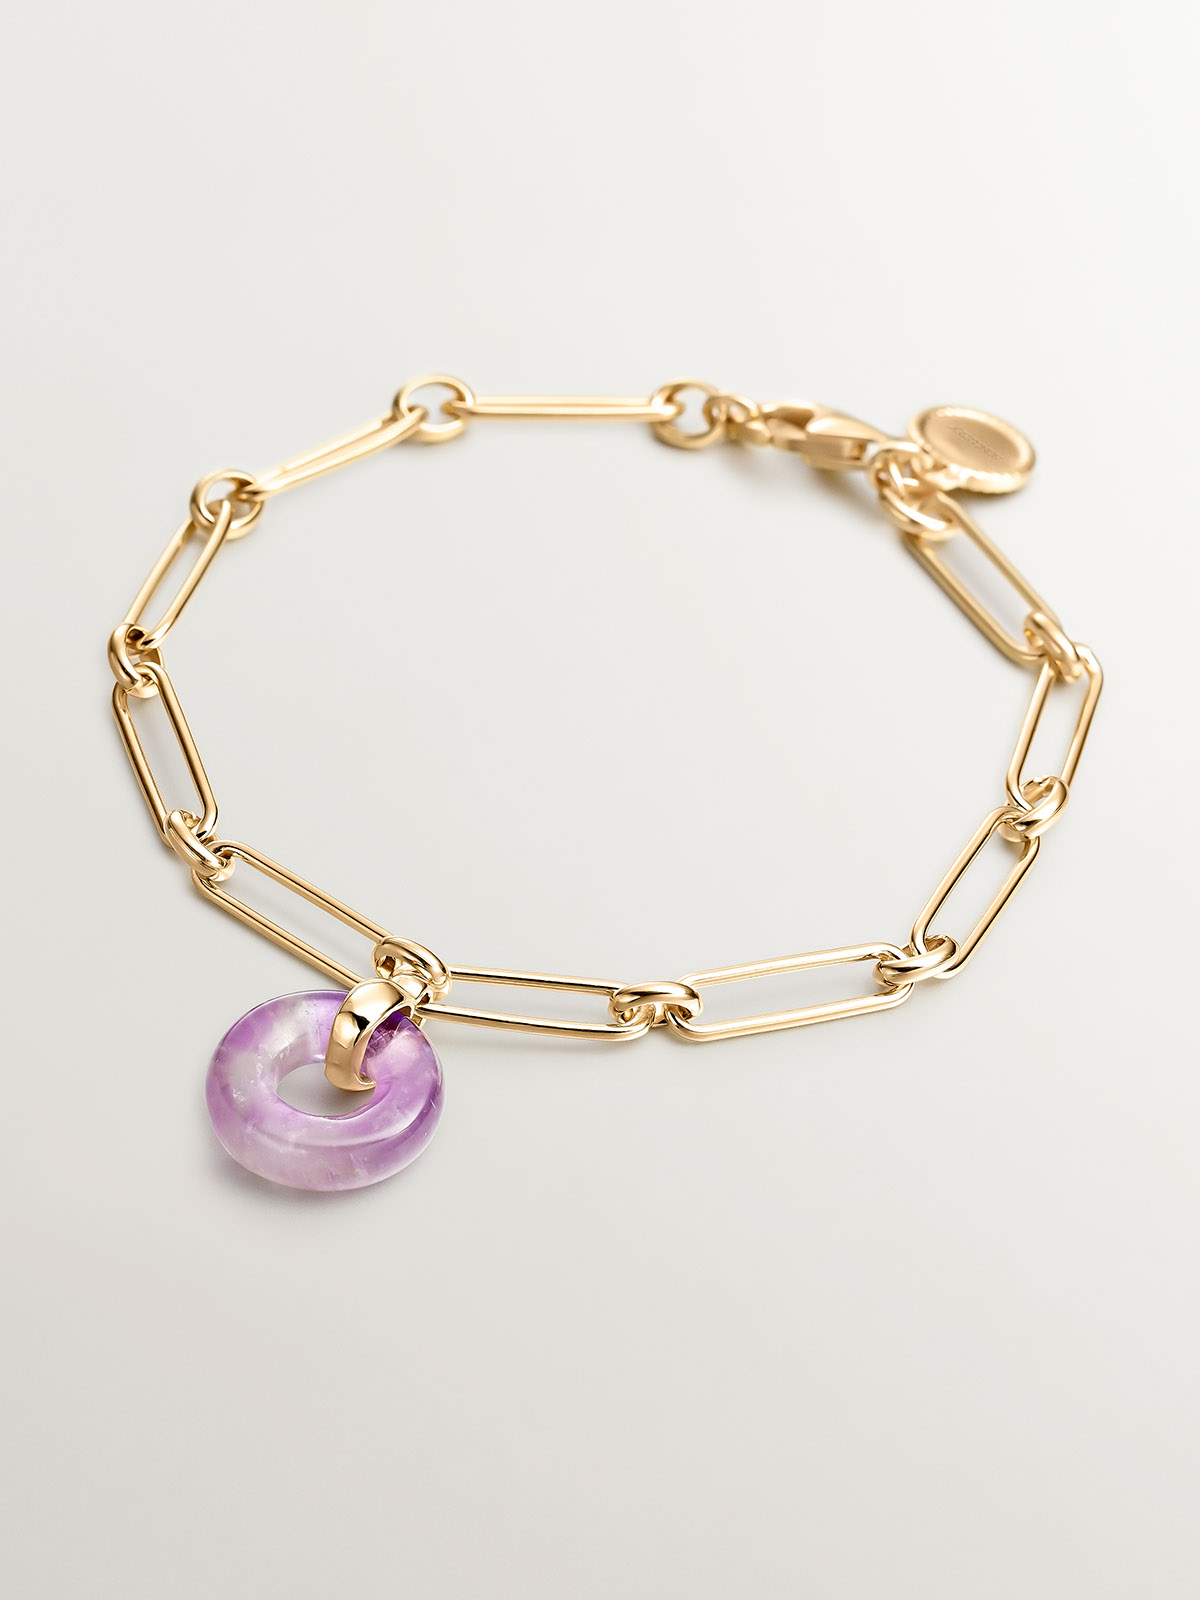 925 Silver link bracelet bathed in 18K yellow gold with purple amethyst